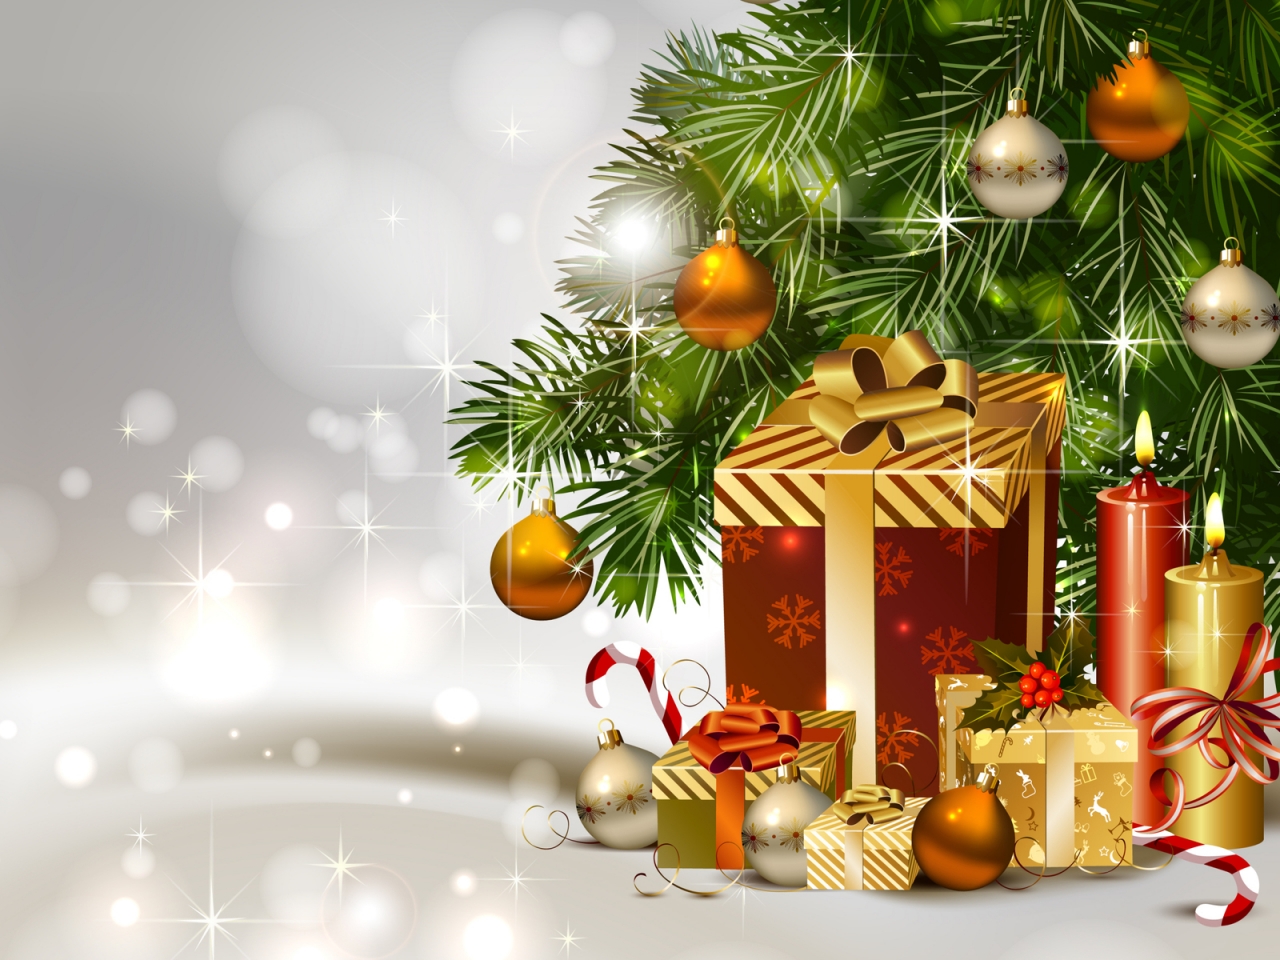 Gifts Under Christmas Tree for 1280 x 960 resolution